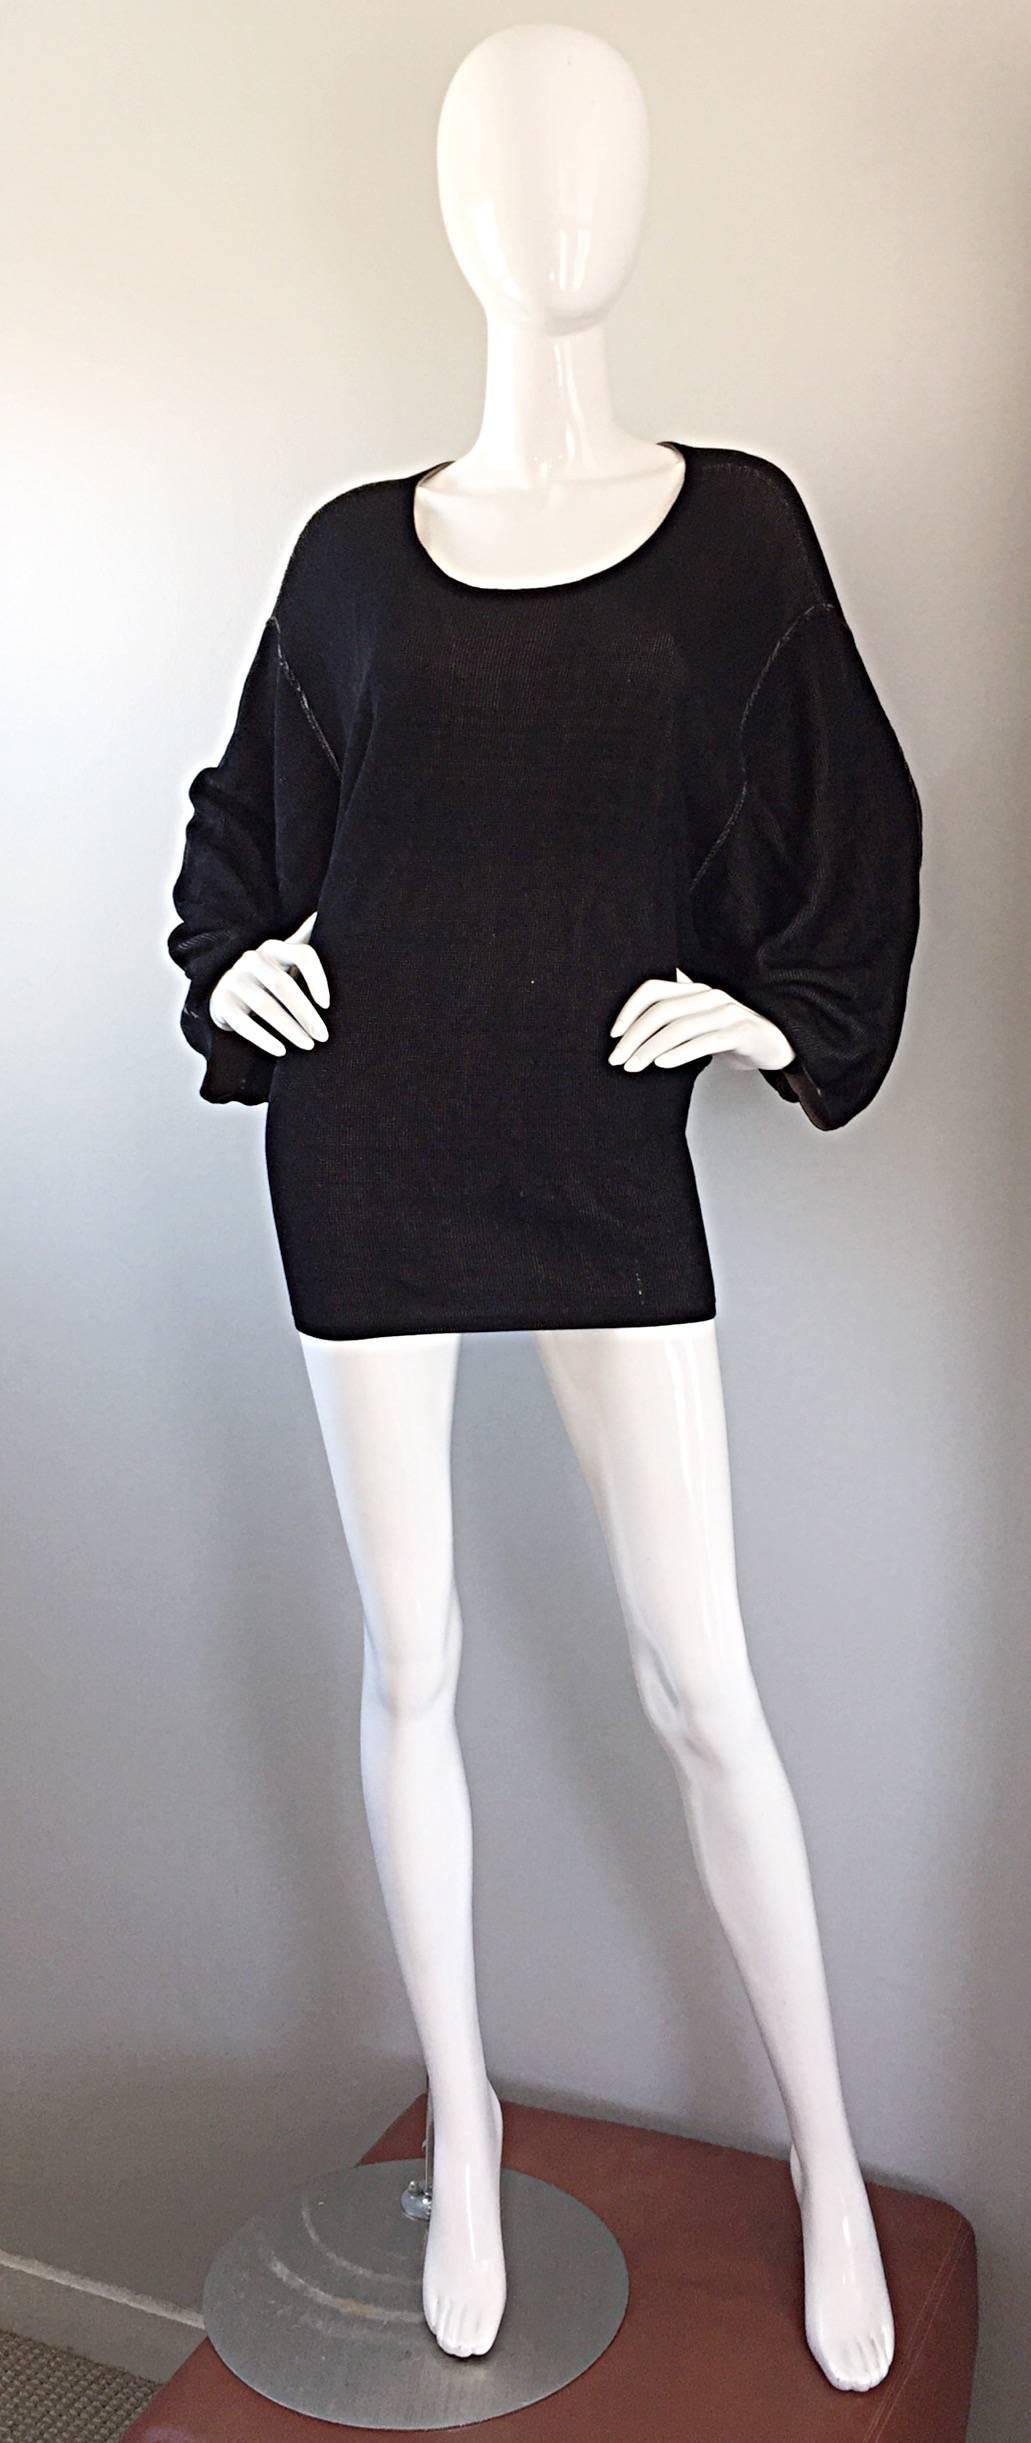 Amazing early AZZEDINE ALAIA black mini dress or sweater tunic! Incredible design by the body conscious designer, whom always produces figure flattering designs. Stitching at the bottom back really accentuates the rear! Chic dolman sleeves make this